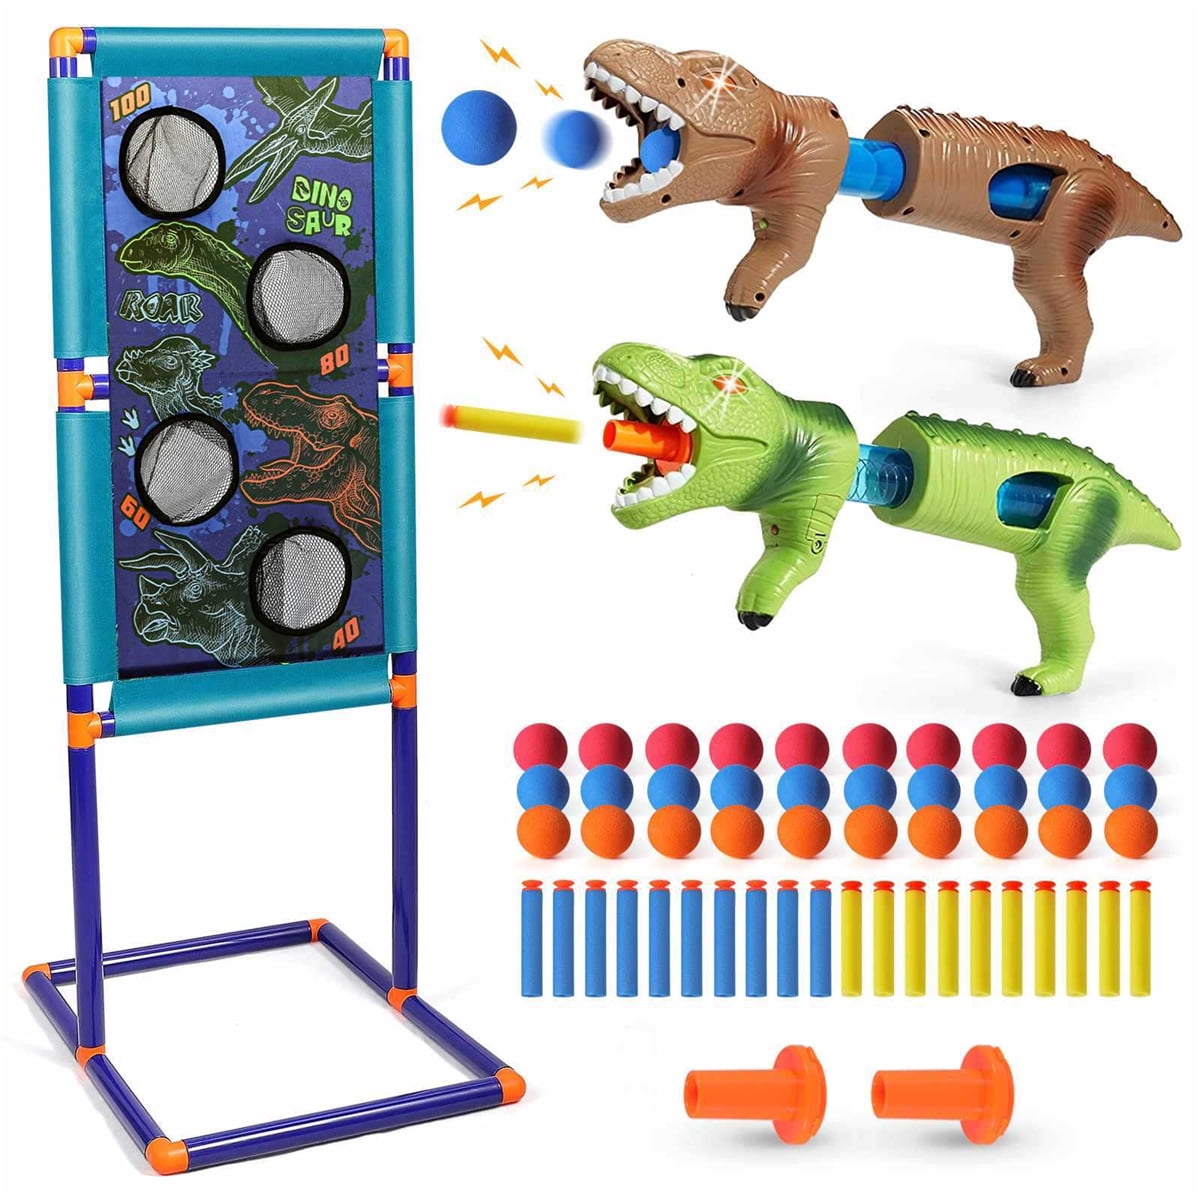 Shooting Target for Kids, Dinosaur Shooting Games for 5 6 7 8 9 10+ Year Old Boys, Electronic Shooting Target Toy with Target Stand, 2 Popper Air Guns and 20 Foam Balls, Compatible with Toy Gun